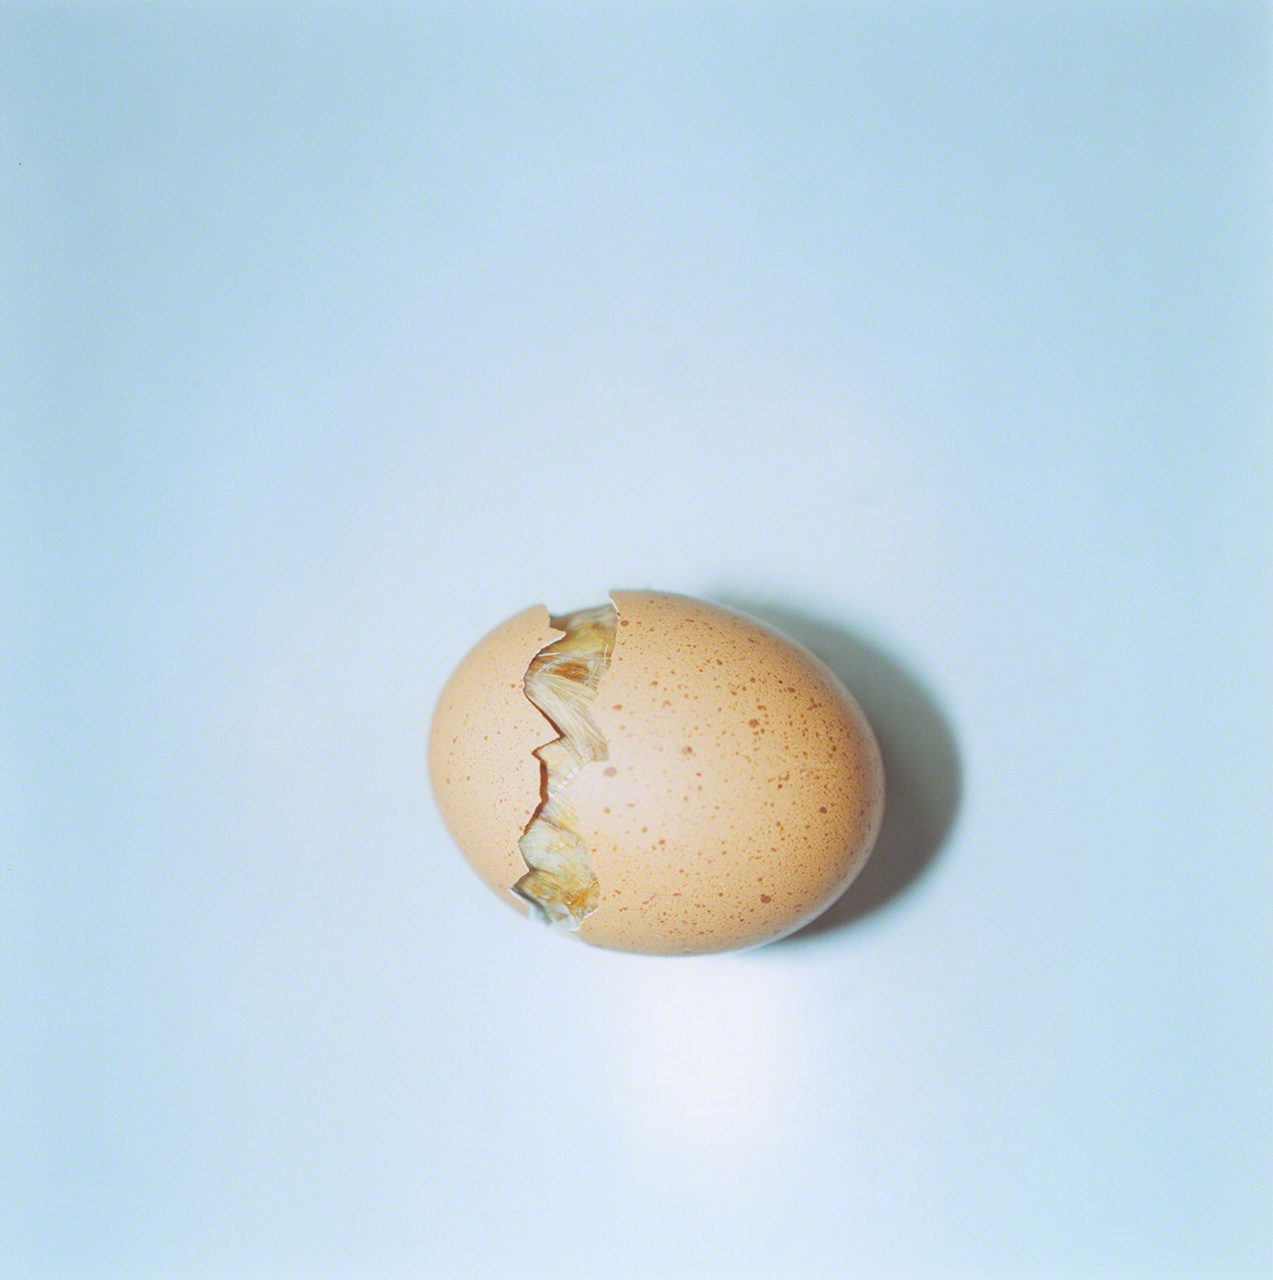 Untitled, from the series of “AILA”, 2004